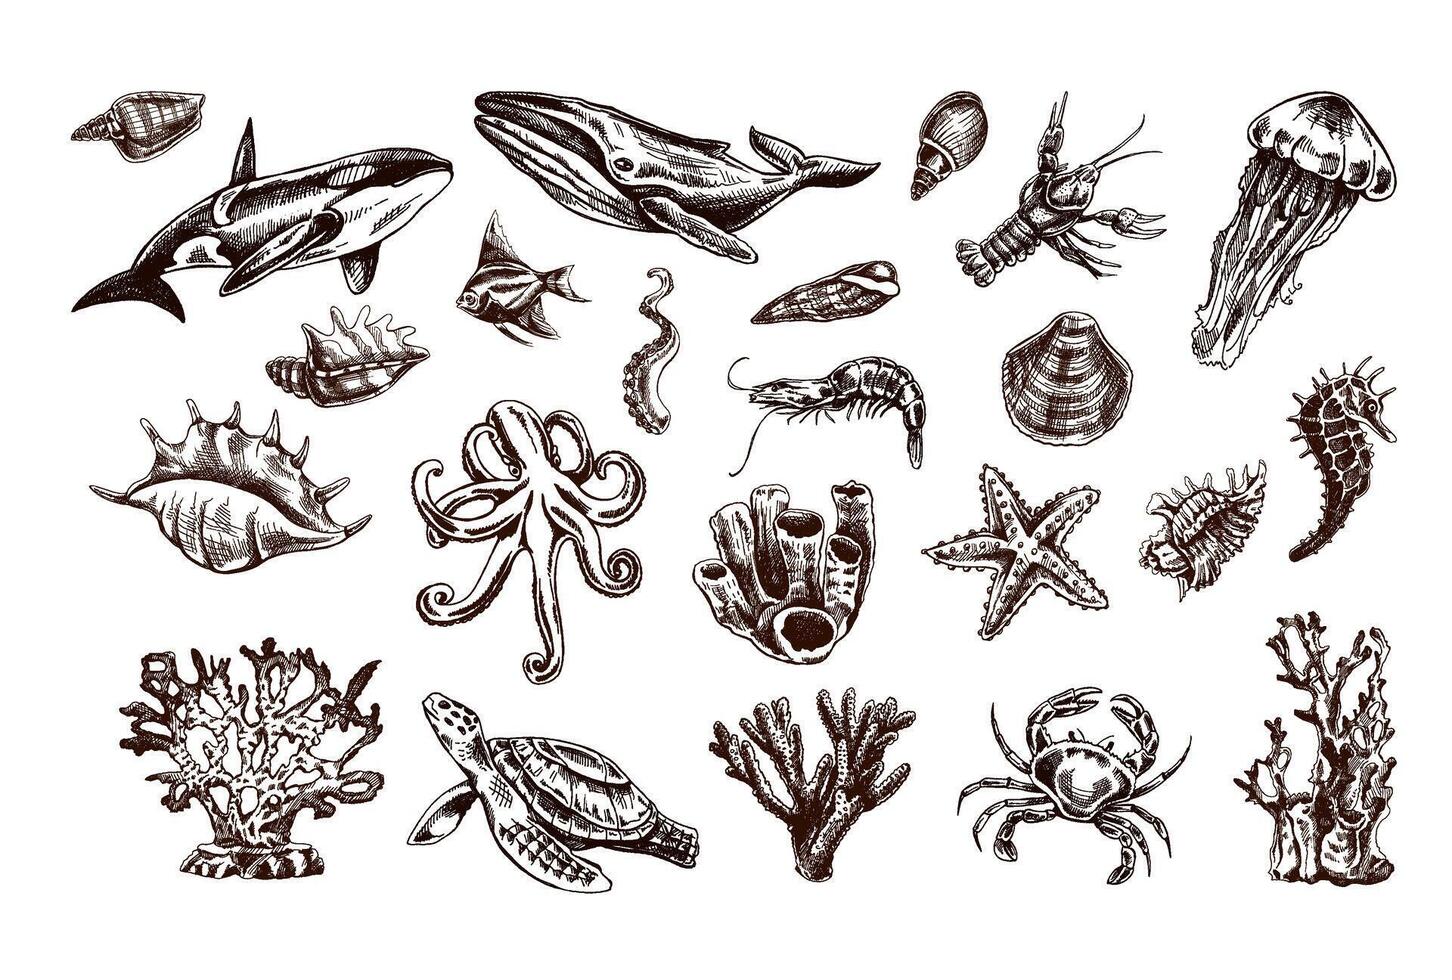 Hand-drawn undersea Animals, creatures set. Vector outline style illustration. Vintage sketch engraving illustration isolated on white background.